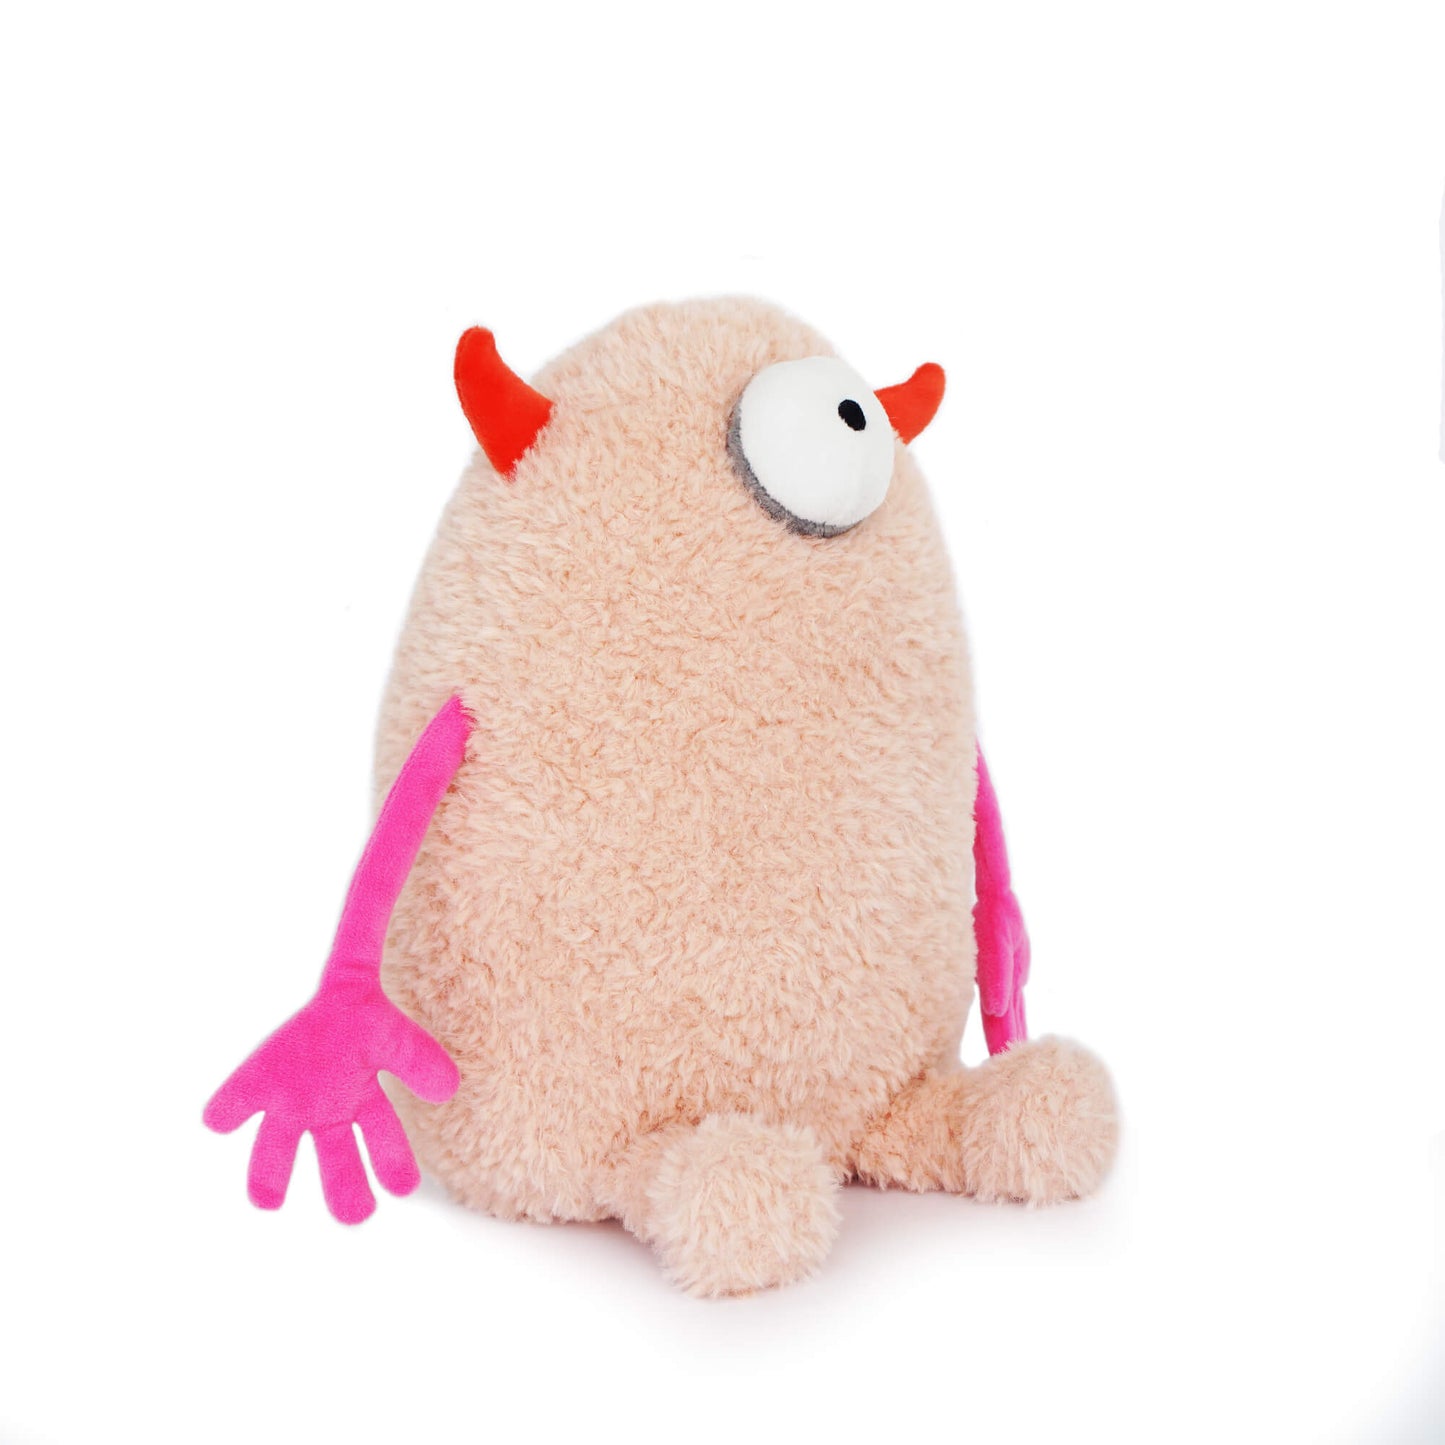 Side of a pink plush monster